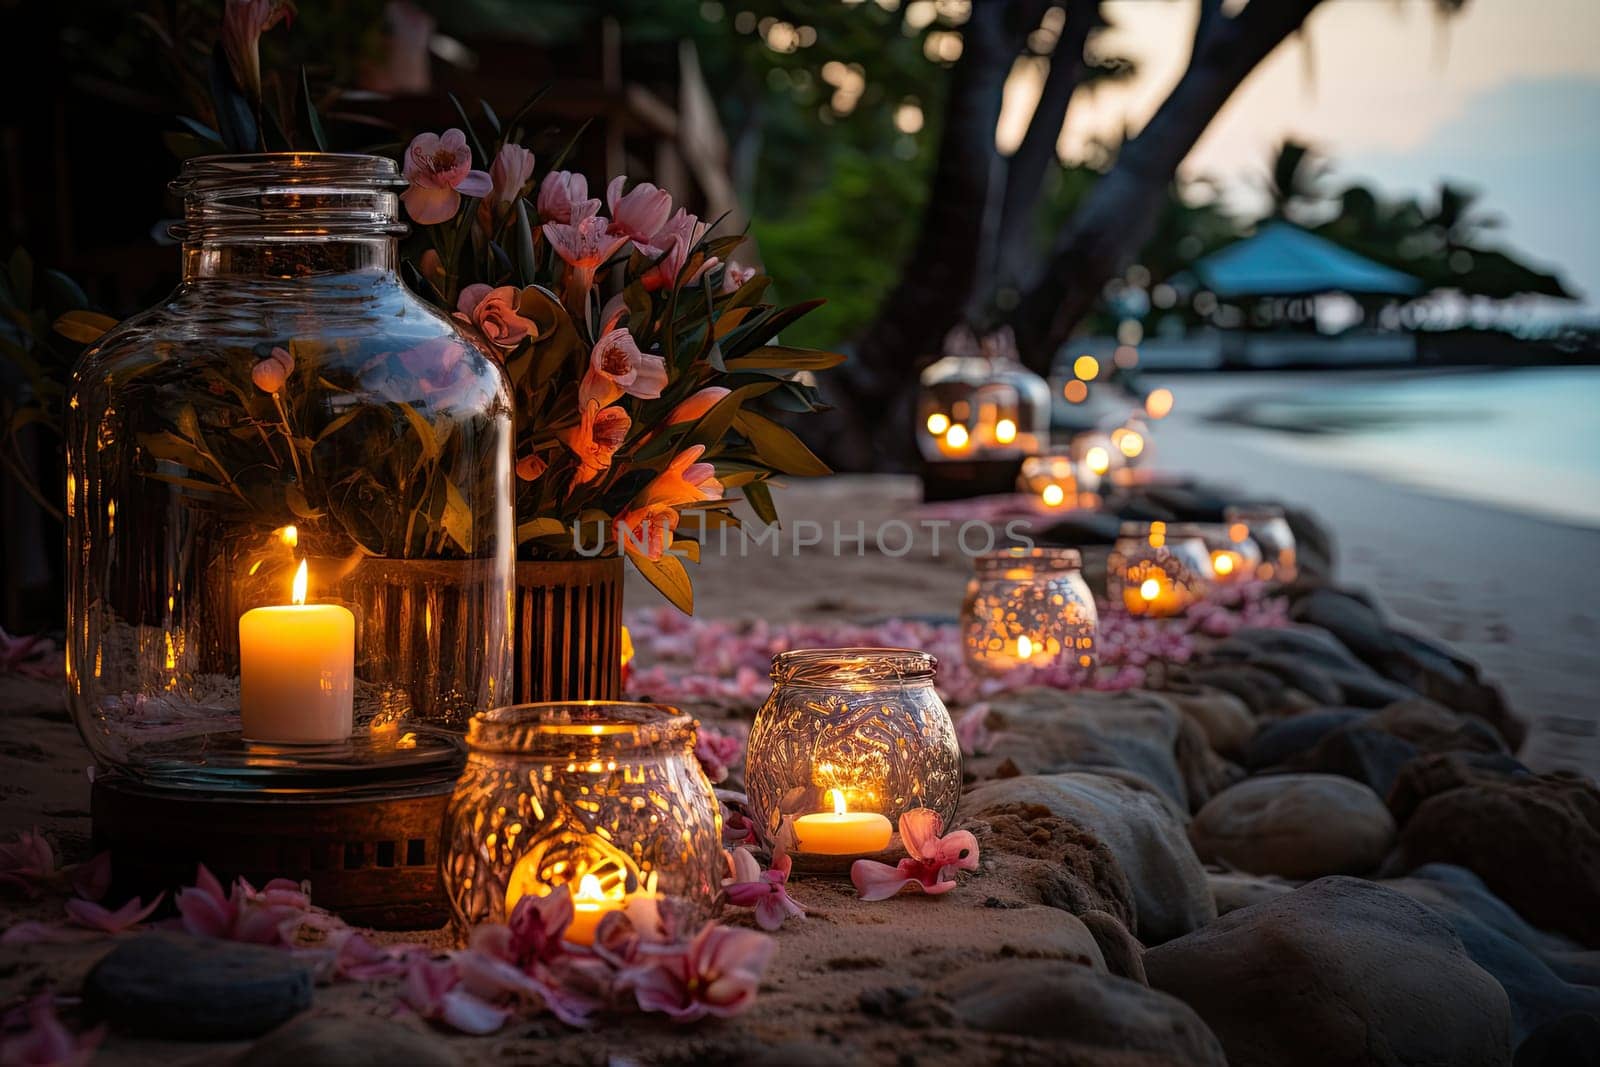 A Serene Beach Sunset Illuminated by a Row of Flickering Candles